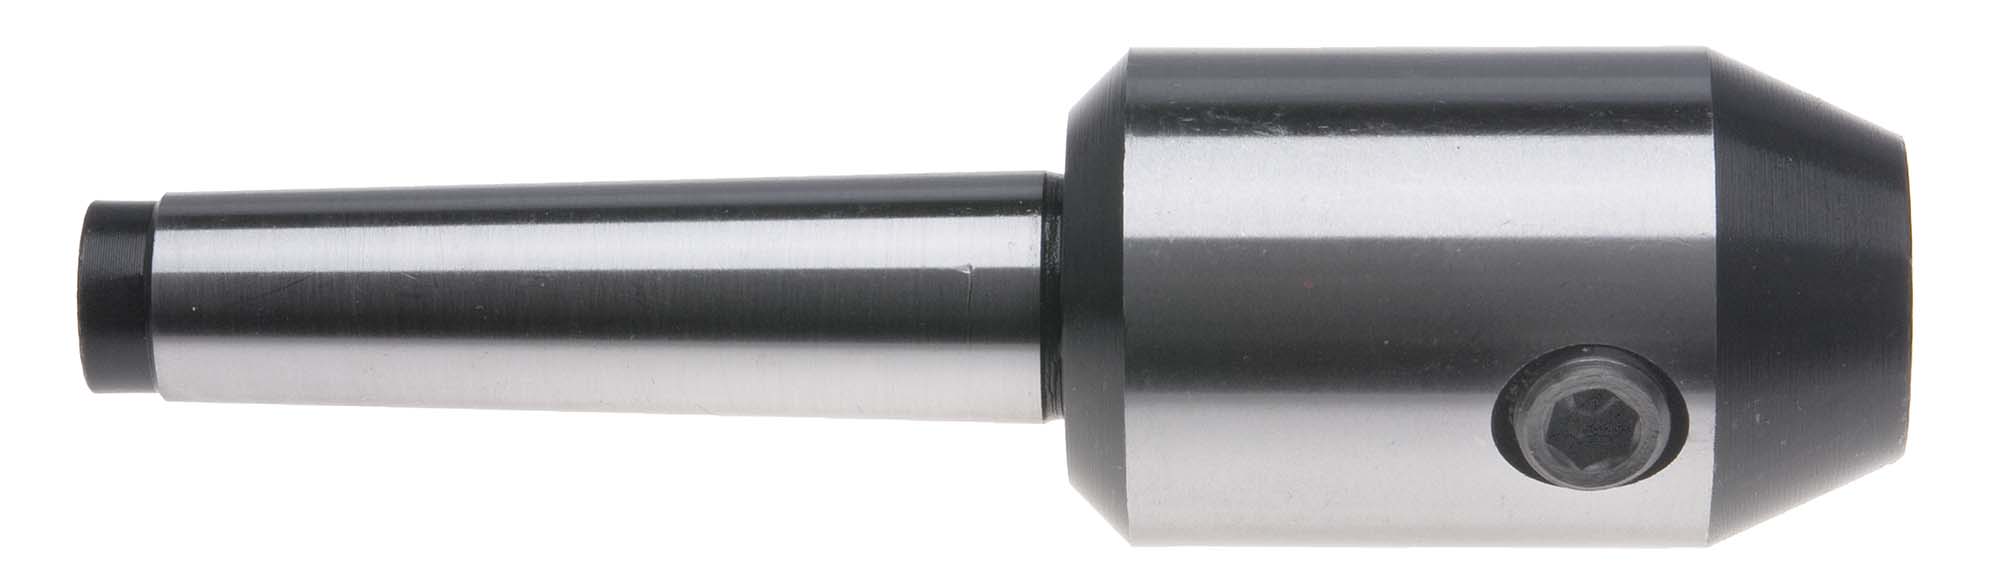 4 MT-1/2 End Mill Adapter with Drawbar End